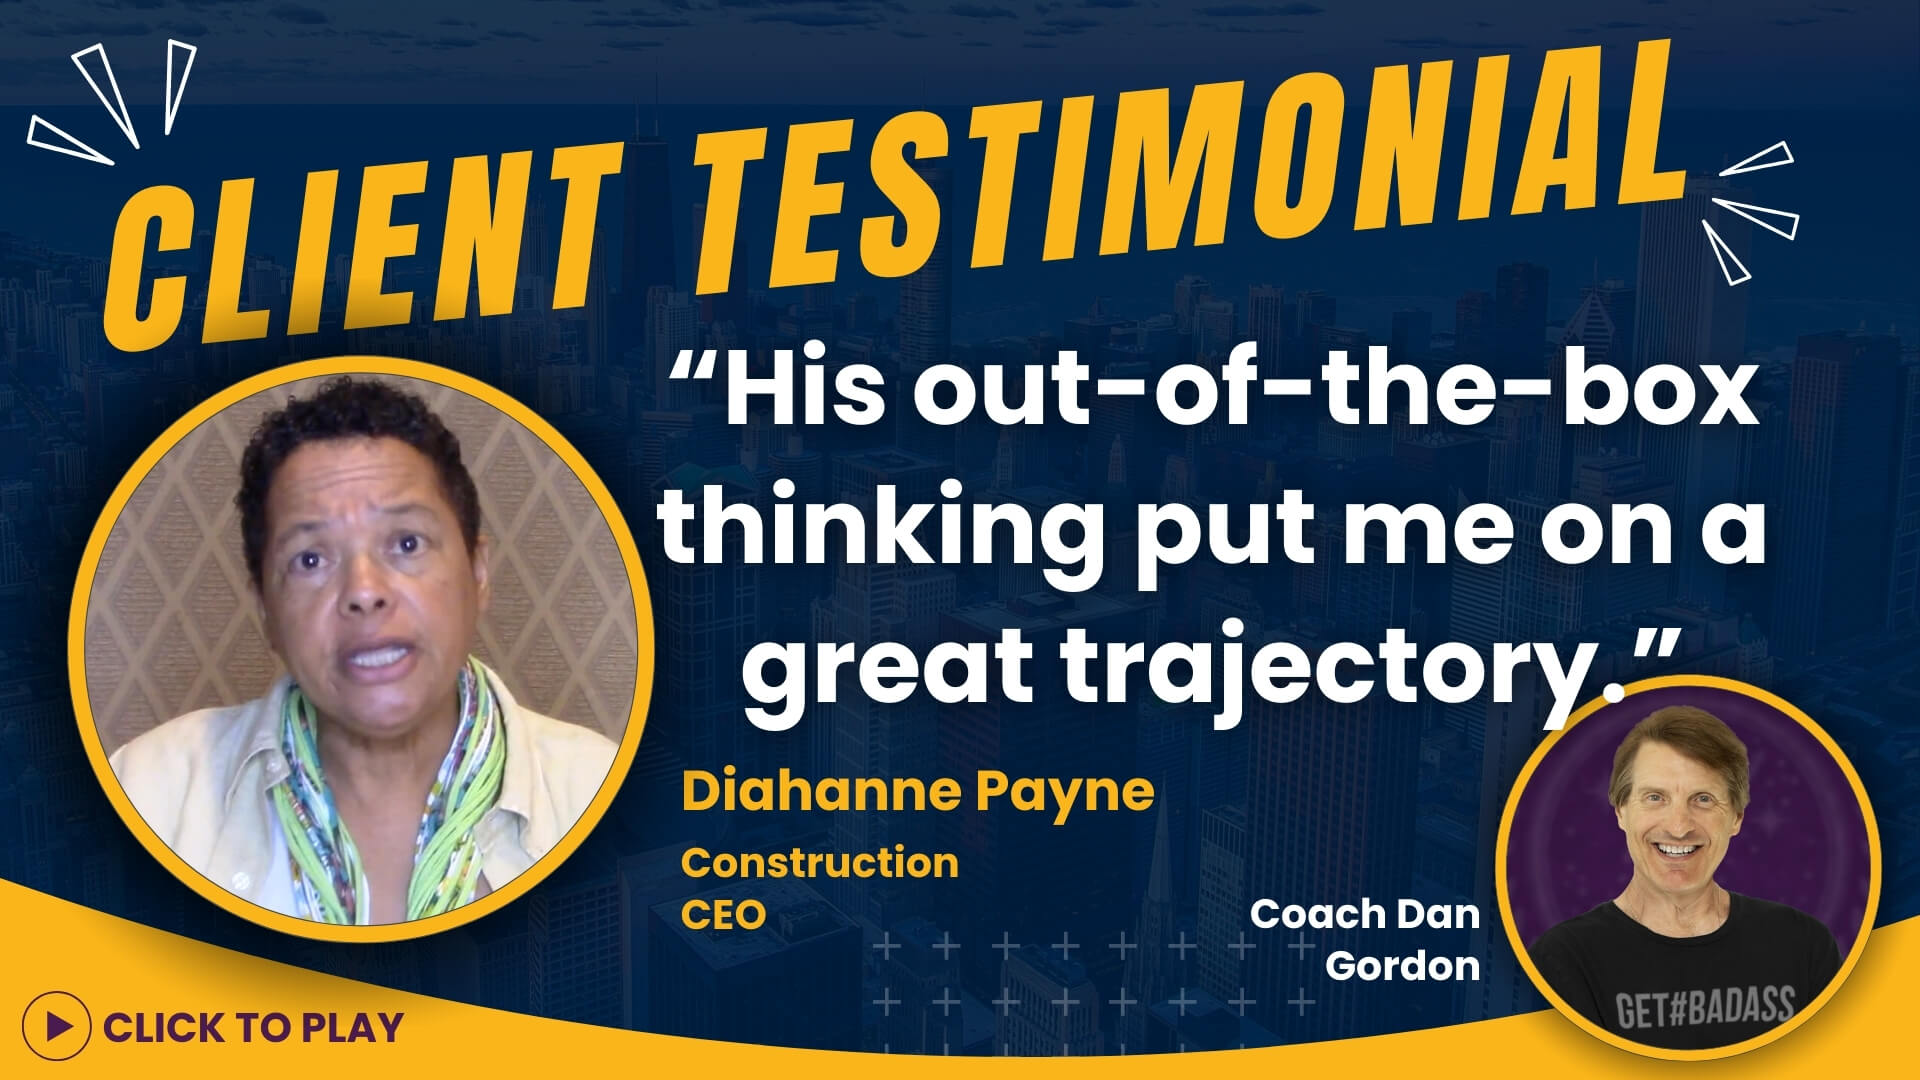 Diahanne Payne, CEO in the construction sector, recounts a significant career shift after Coach Dan Gordon's out-of-the-box thinking, highlighted with a 'Click to Play' video option.